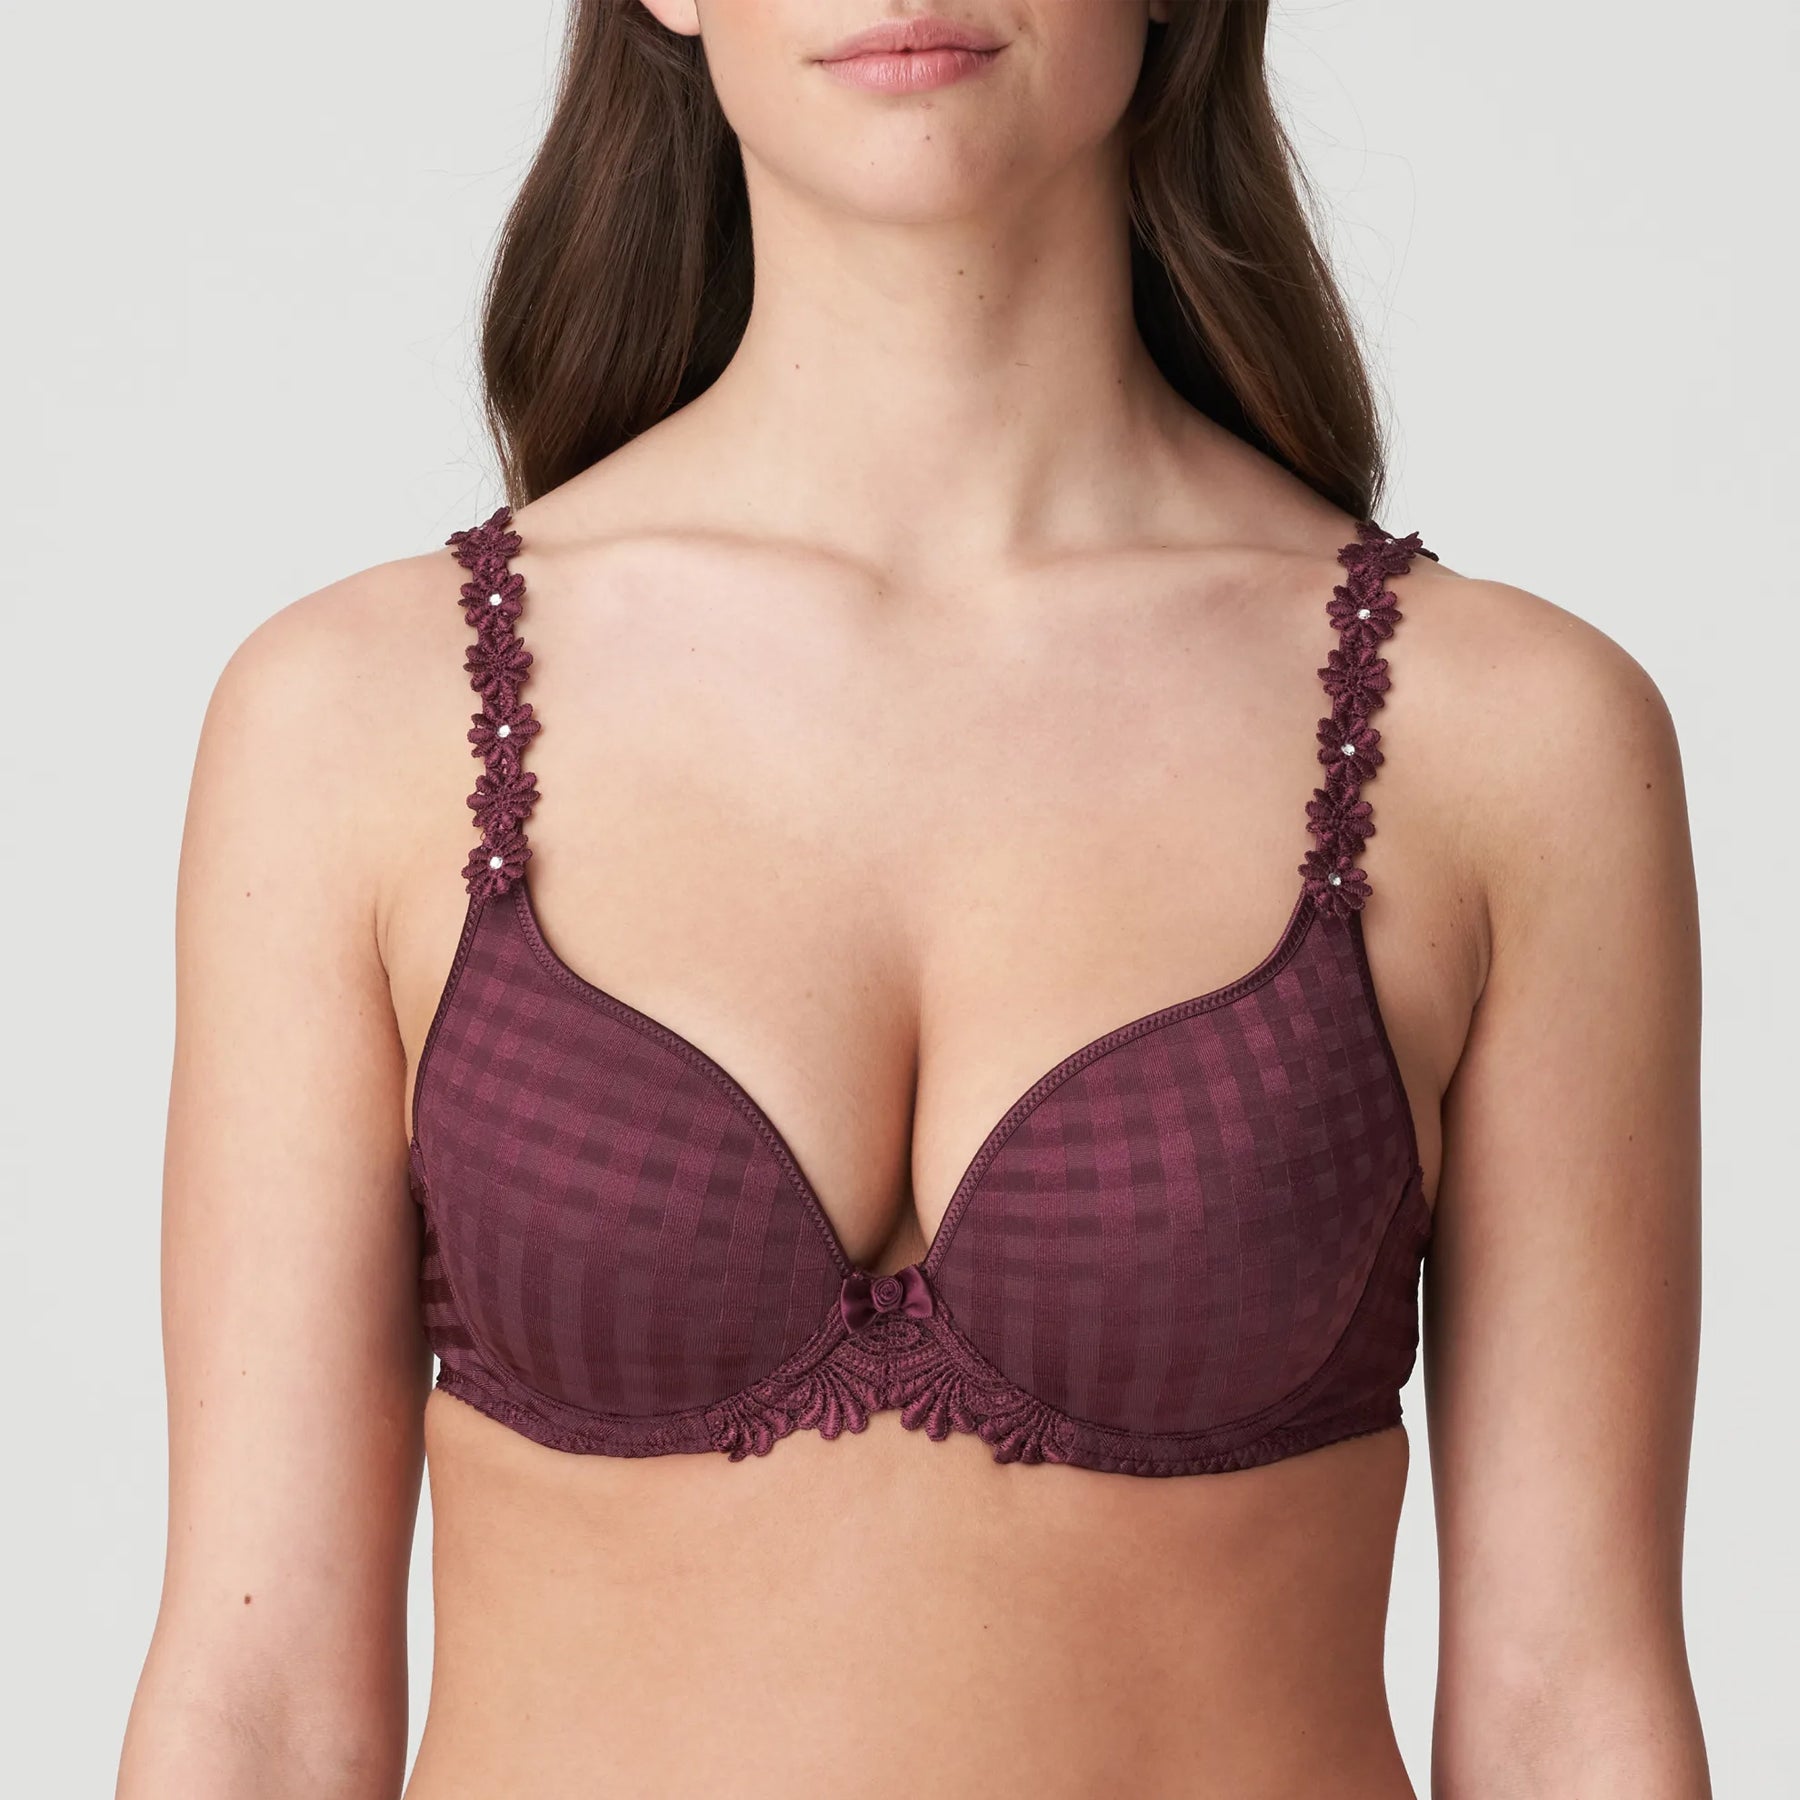 Marie Jo Avero Padded Bra Strapless NATURAL buy for the best price CAD$  168.00 - Canada and U.S. delivery – Bralissimo